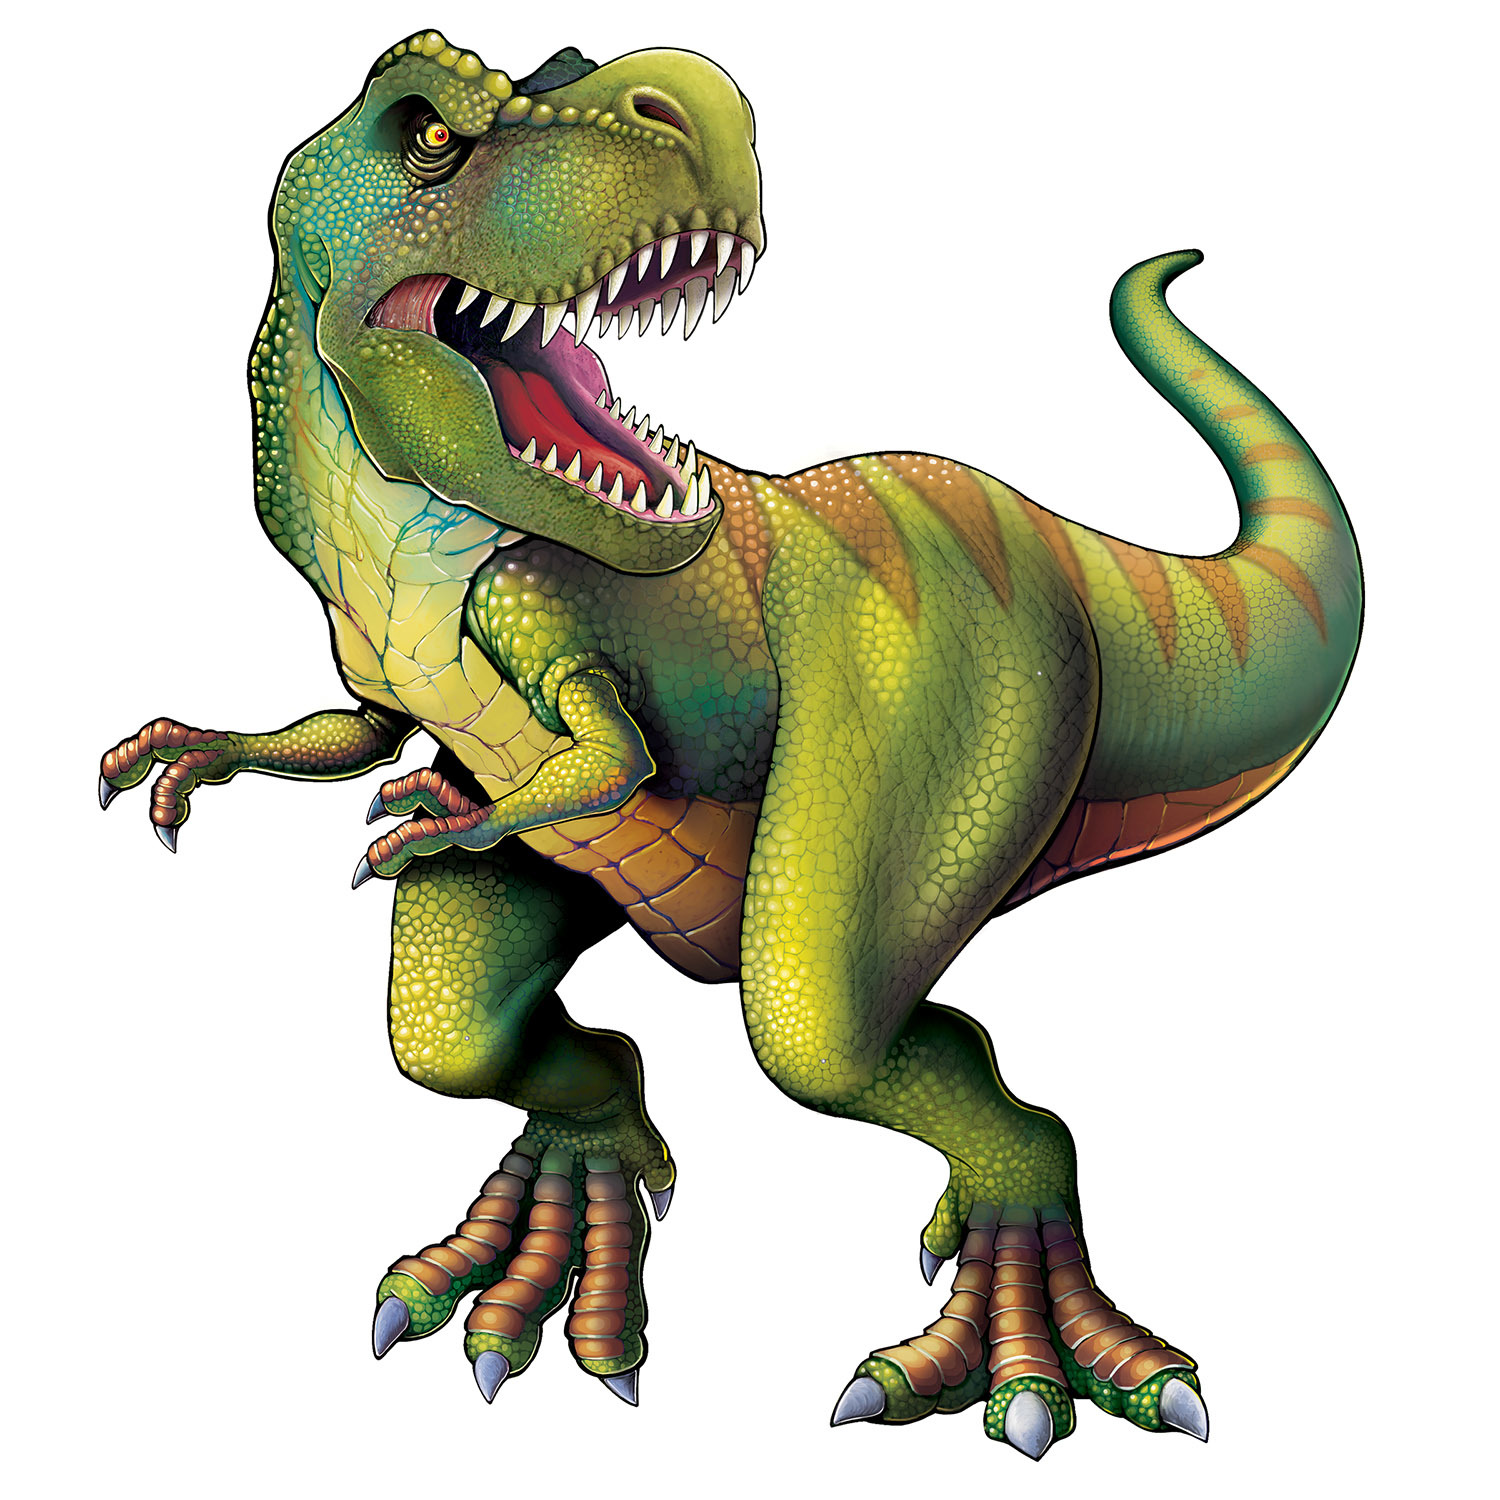 Collection 93+ Images tyrannosaurus rex pictures for kids Full HD, 2k, 4k